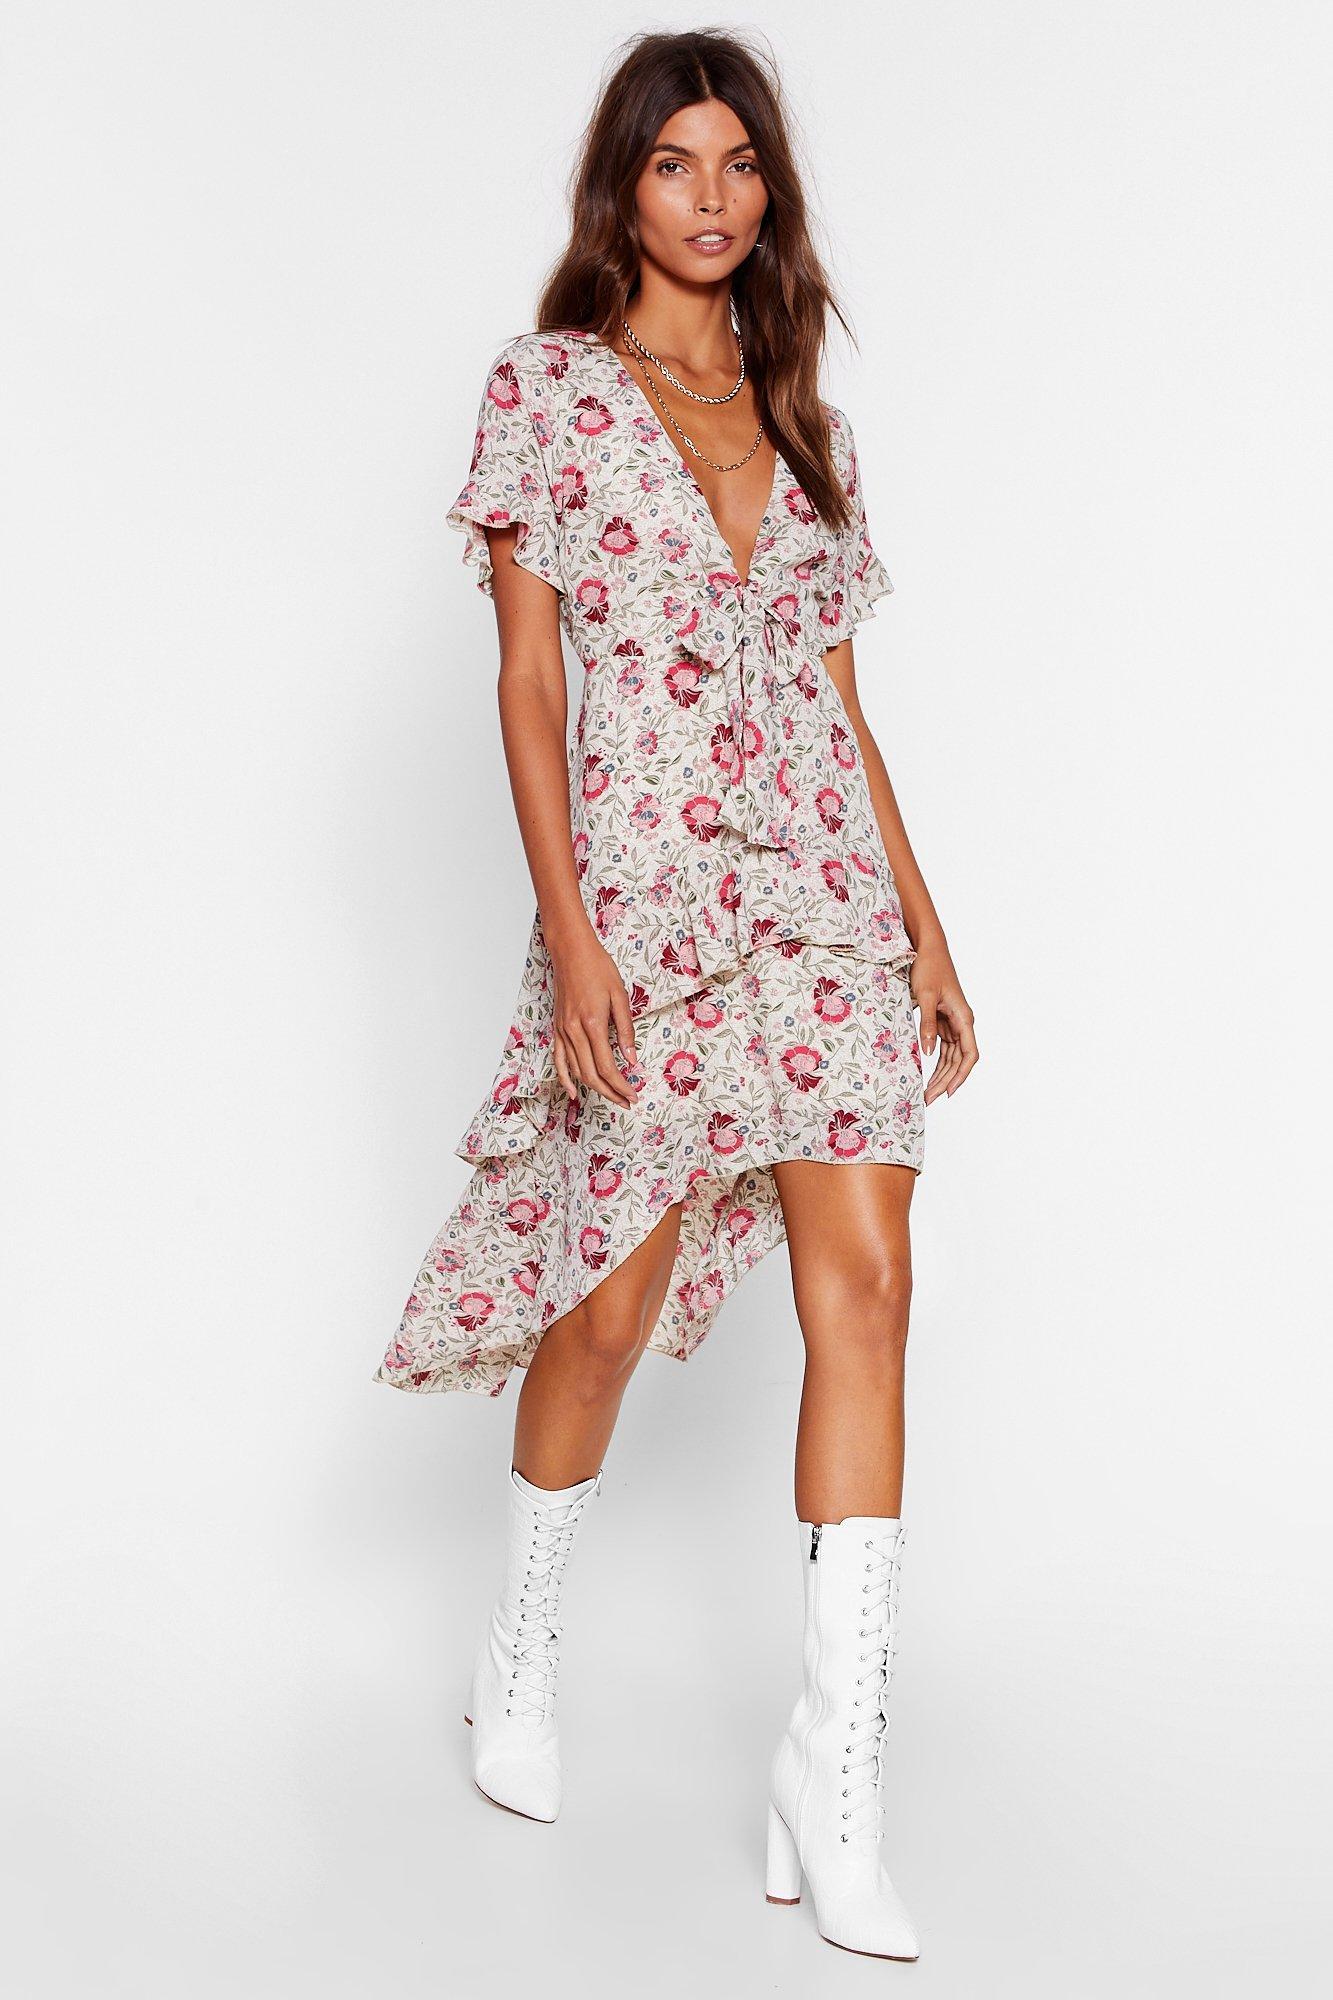 Nasty Gal Chiffon Playing For Flower Floral Midi Dress in White | Lyst